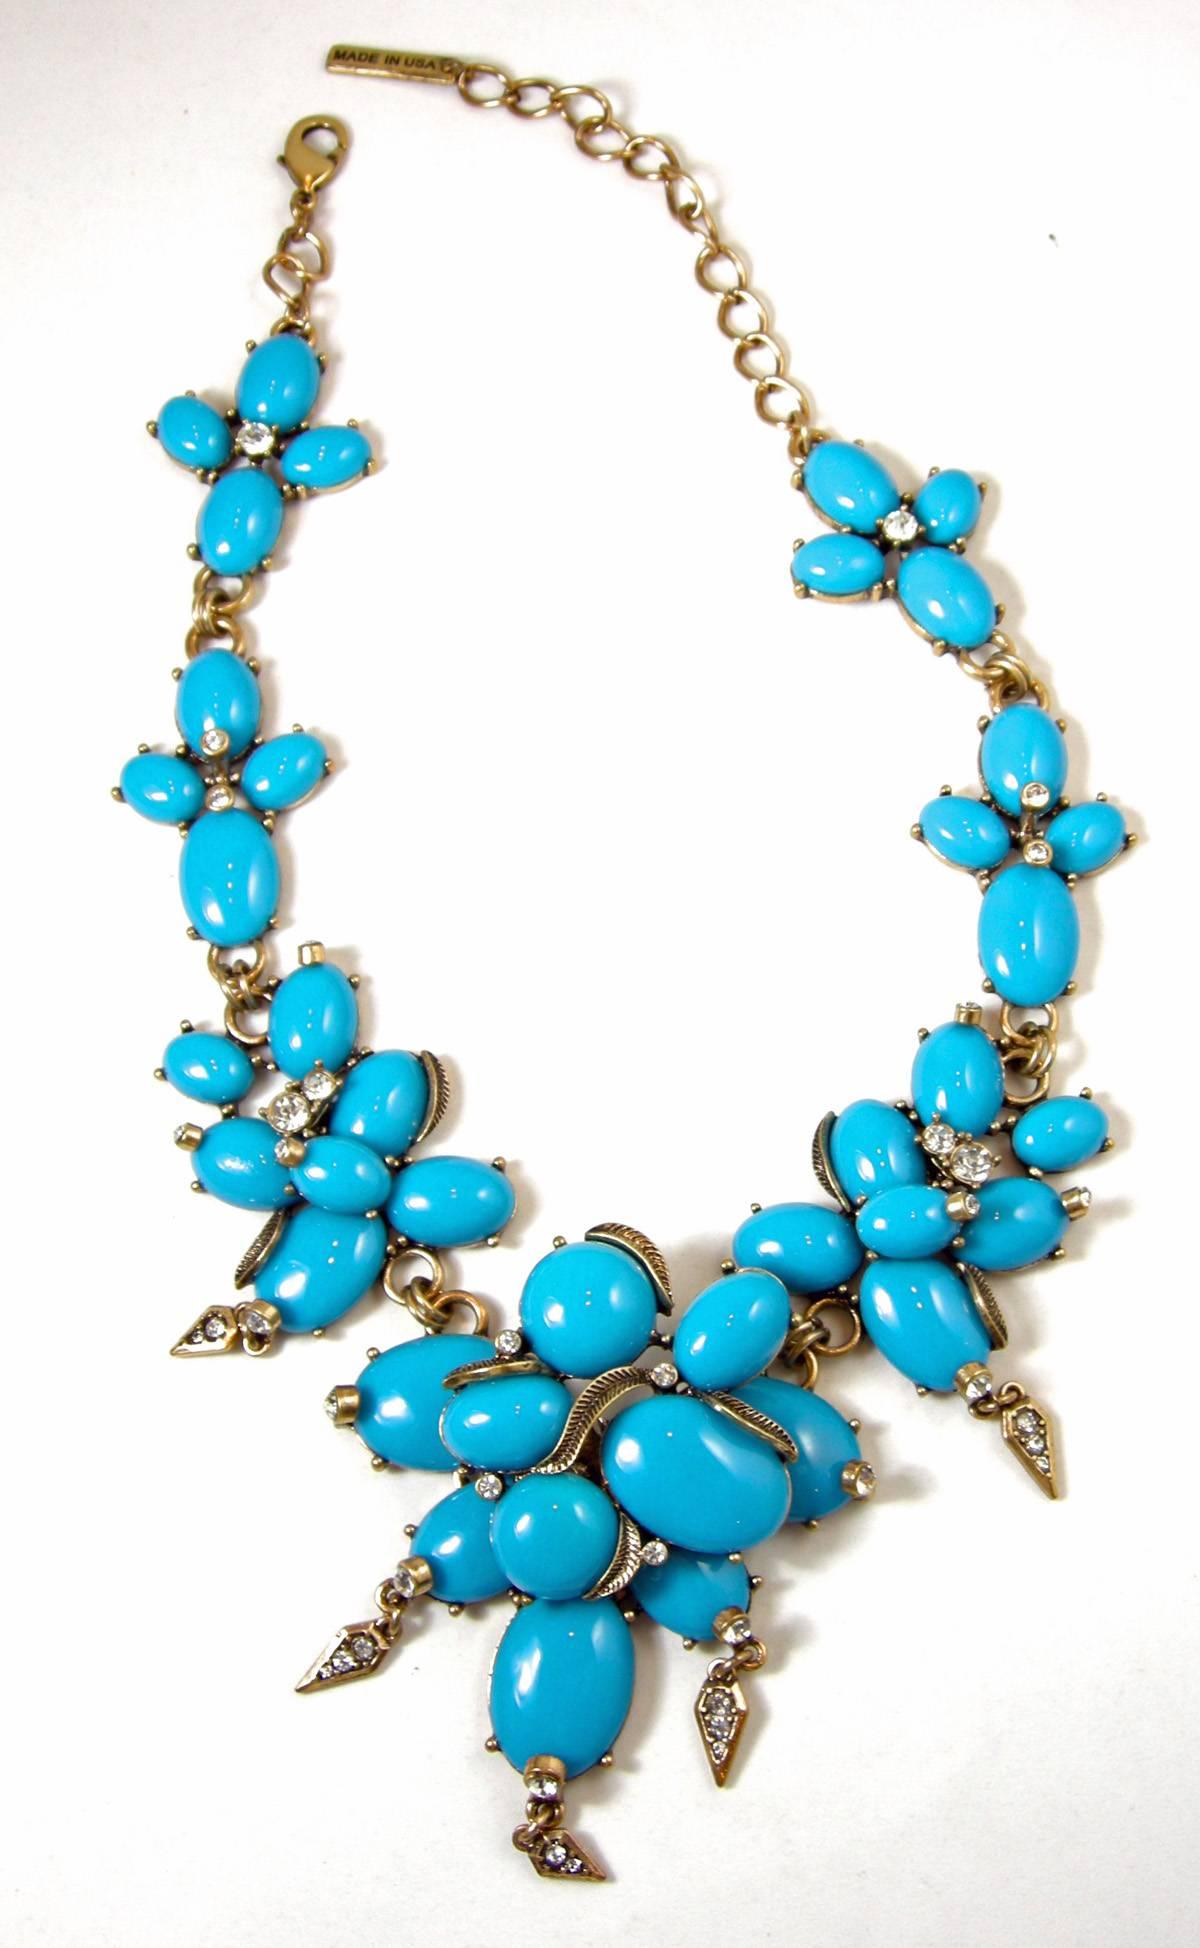 This is an Oscar De La Renta Necklace that is massive and makes a statement! It has large oval turquoise enamel cabochons set in clusters. The largest center link has layered ovals with thick gold wires in between tipped with clear rhinestones. The